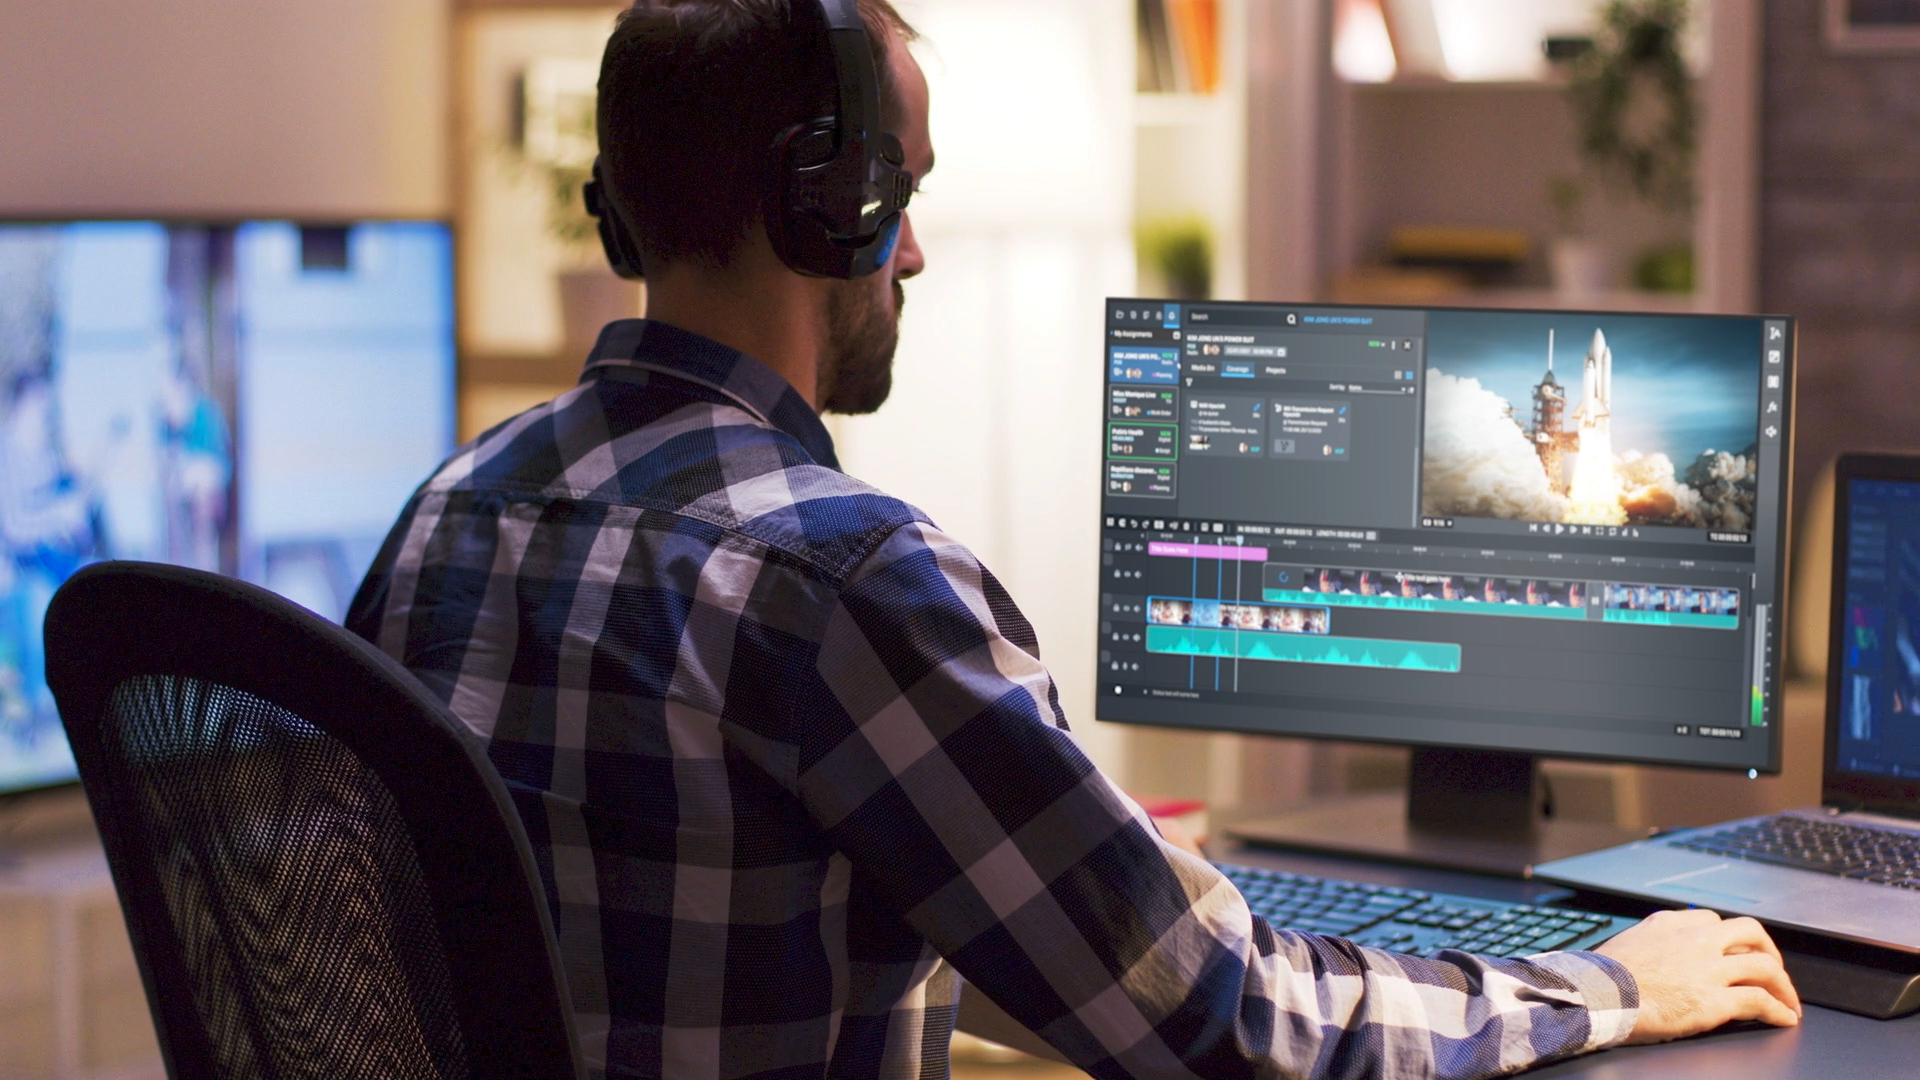 Dalet Pyramid Cut is Dalet Pyramid’s new web-based feature-rich video and audio editor